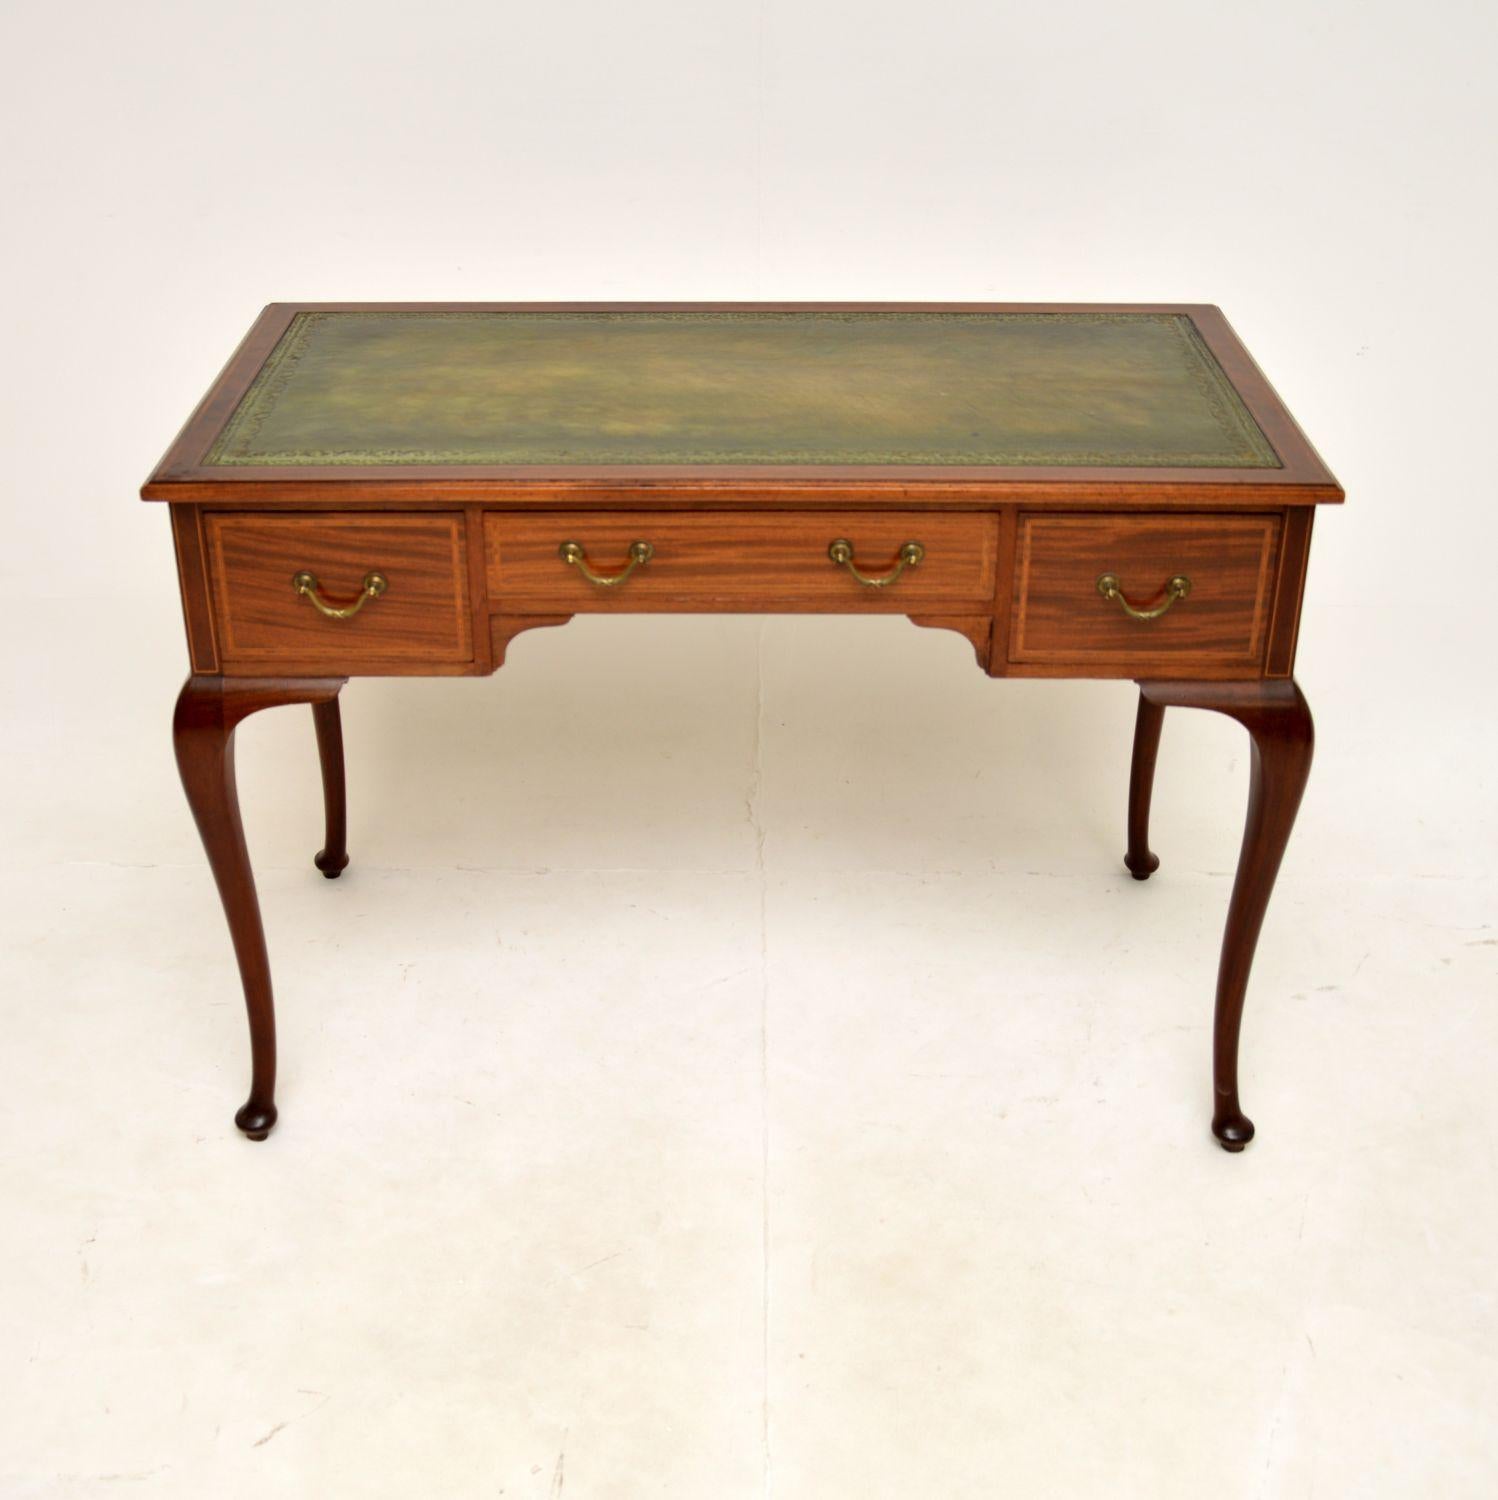 A wonderful antique Edwardian inlaid desk by Maple & co. This was made in England, it dates from around the 1900-1910 period.

It is of superb quality, with an elegant yet sturdy design. This sits on cabriole legs, there are inlaid satinwood borders